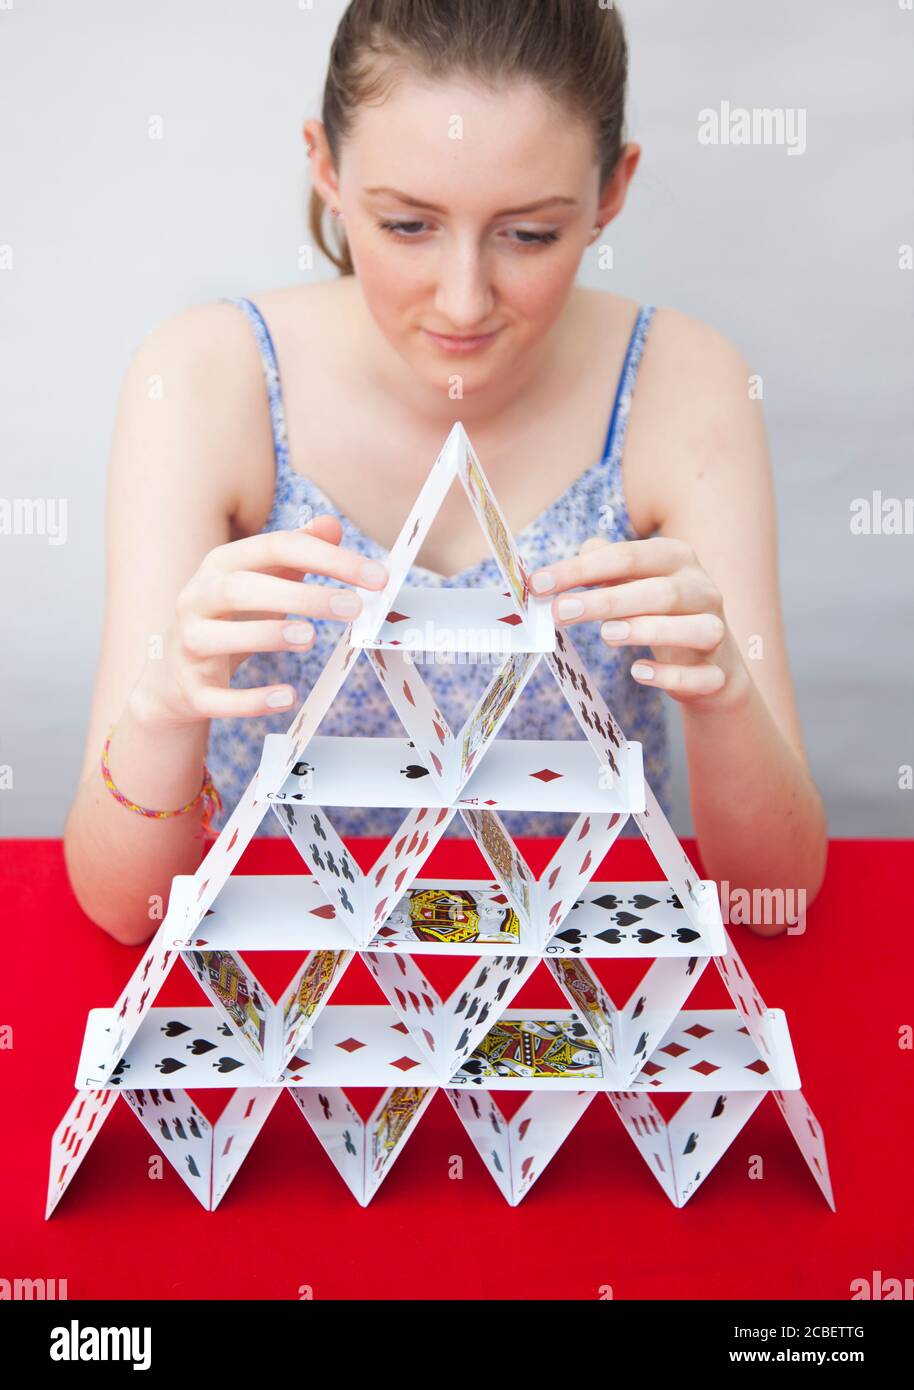 A teenage girl building a house of cards Stock Photo